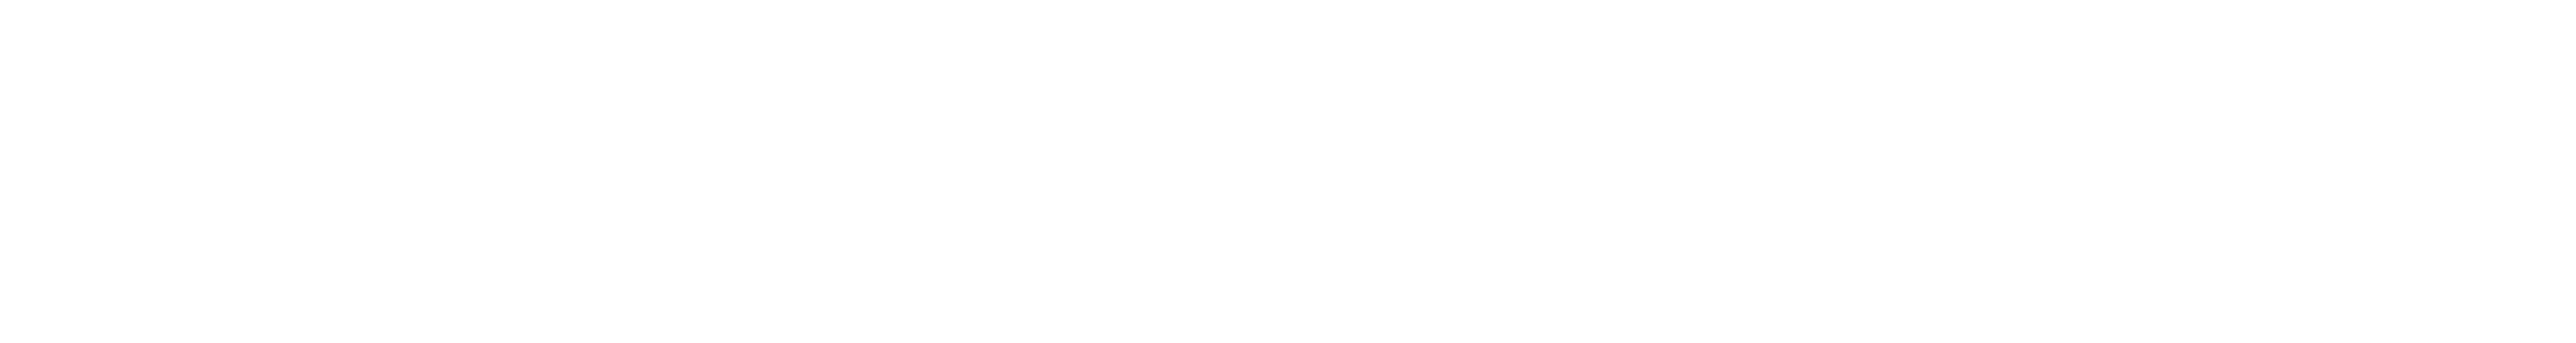 Space Apes United Header - CONCORDIA ALLIANCE.png